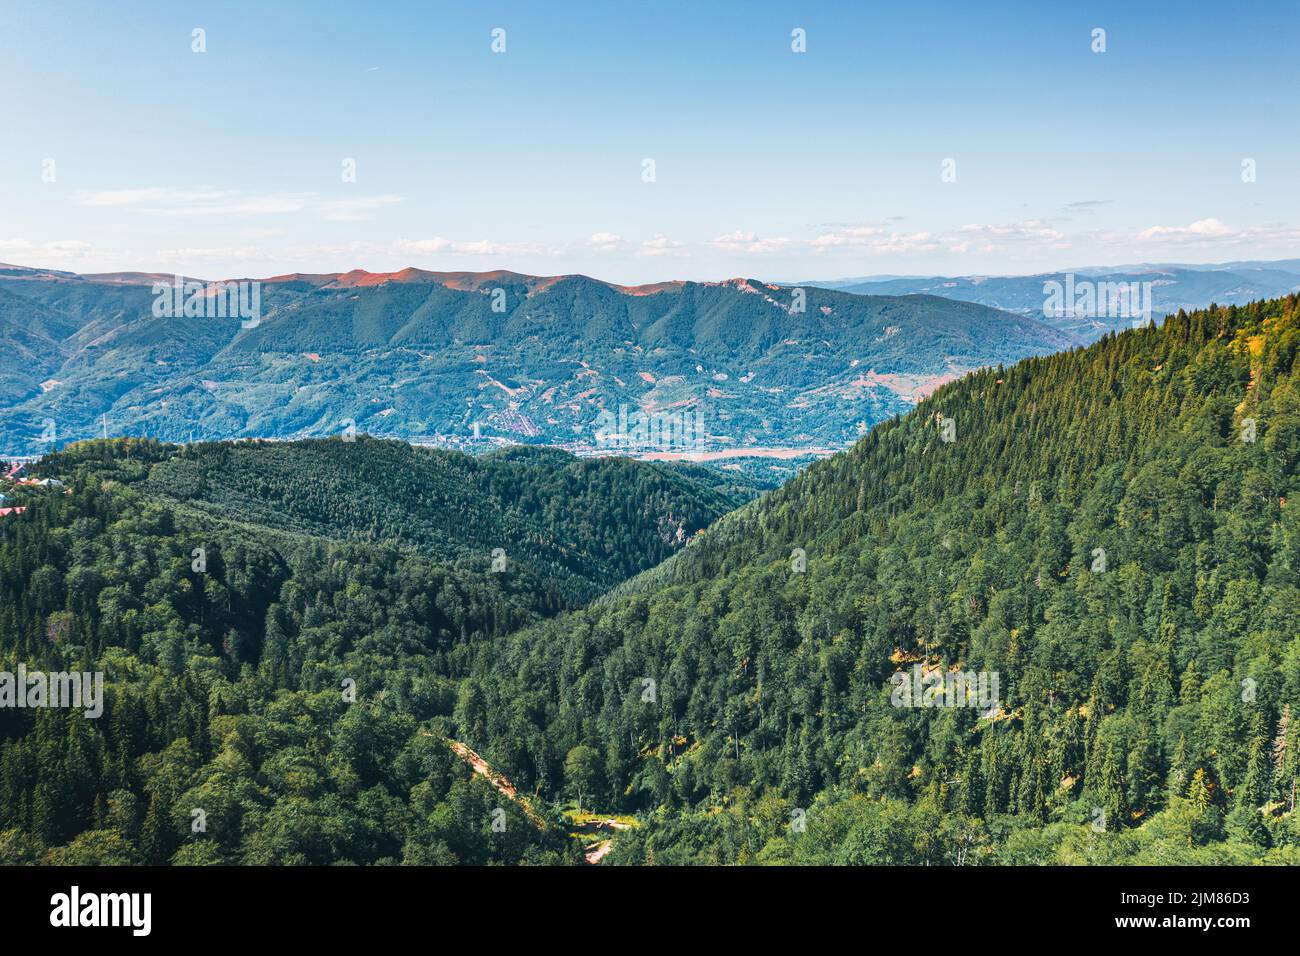 Aerial landscape view of high peaks with dark pine forest trees in wild mountains.Beautiful views from the hiking trail in the Carpathian mountains. Stock Photo